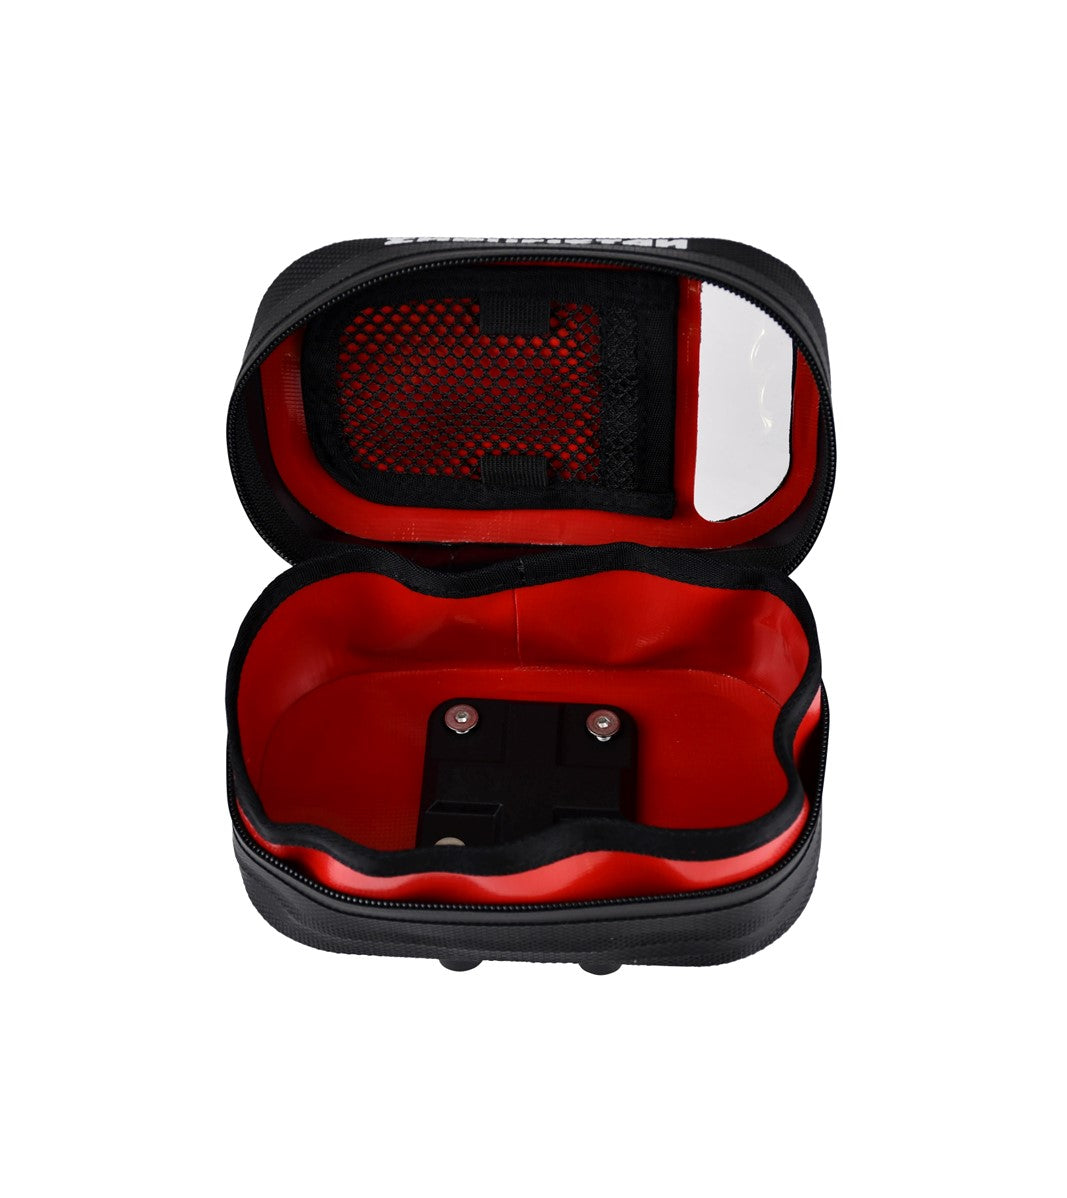 Enduristan USA, Handlebar Bag (Small), LUHA-001, adventure bike luggage, adventure luggage, dirt bike luggage, dirtbike luggage, enduristan, enduro luggage, handlebar bag, luggage, motorbike bags, motorbike luggage, off road luggage, overland travel, packs and duffles, soft motorcycle luggage, soft motorcycle panniers, soft saddle bags enduro, waterproof, waterproof enduro bags, waterproof motorcycle luggage, Handlebar Bags - World’s toughest waterproof luggage designed for adventure sports riders and enthu